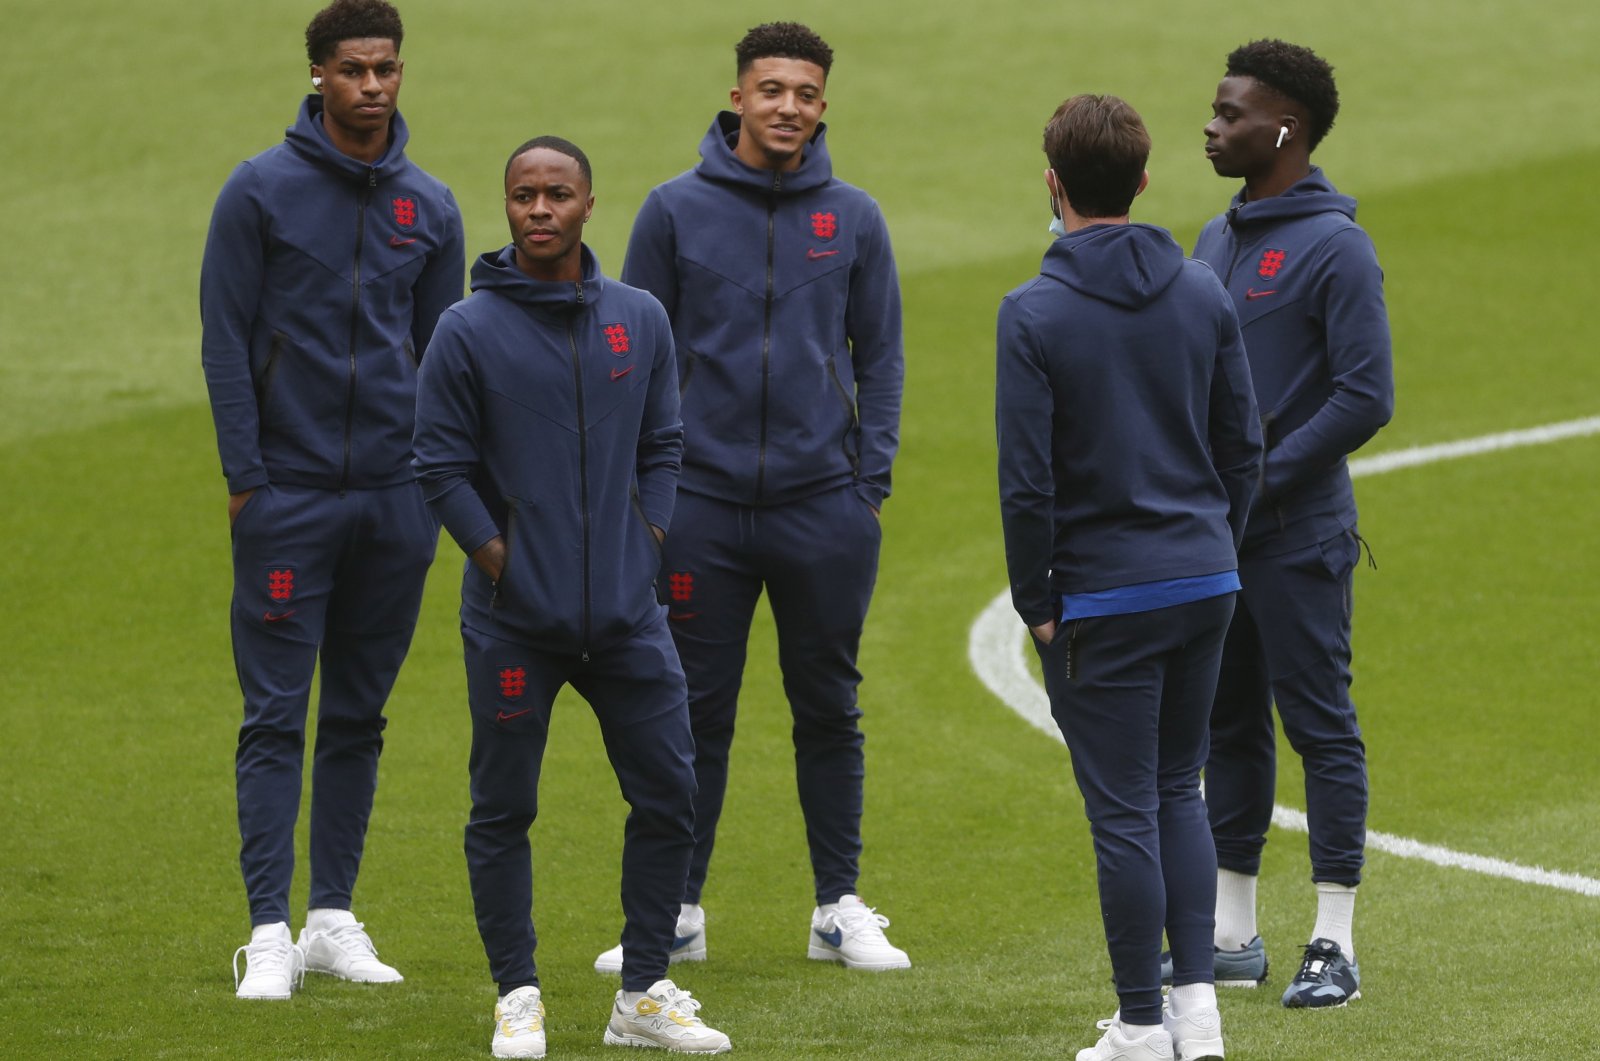 (From L to R) England's Marcus Rashford, Raheem Sterling, Jadon Sancho, Bukayo Saka and Ben Chilwell before their Euro 2020 Round of 16 match against Germany at the Wembley, London, England, June 29, 2021.